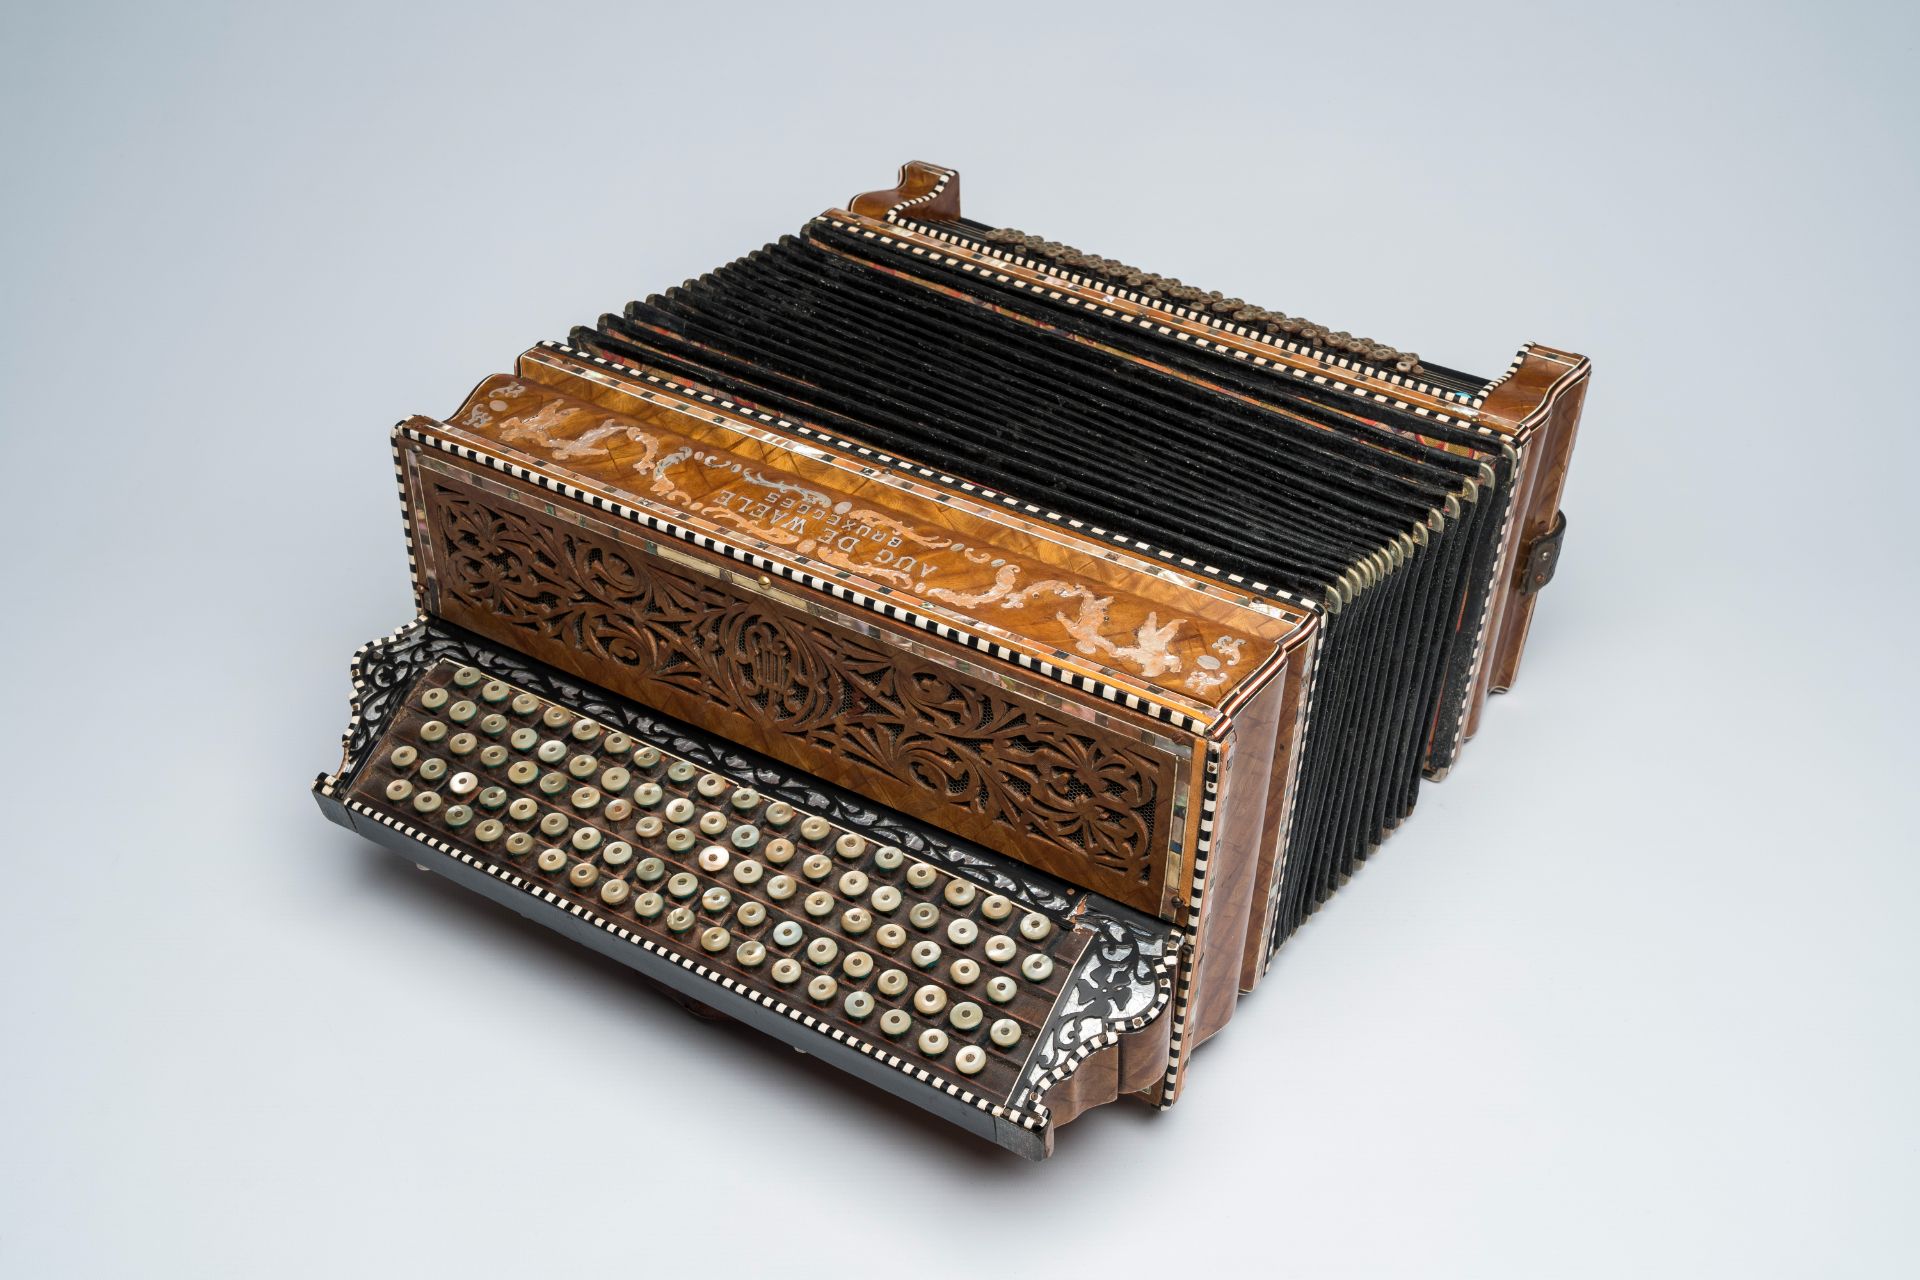 A Belgian 'August De Waele' chromatic accordion with button keyboard, ca. 1920 - Image 5 of 5